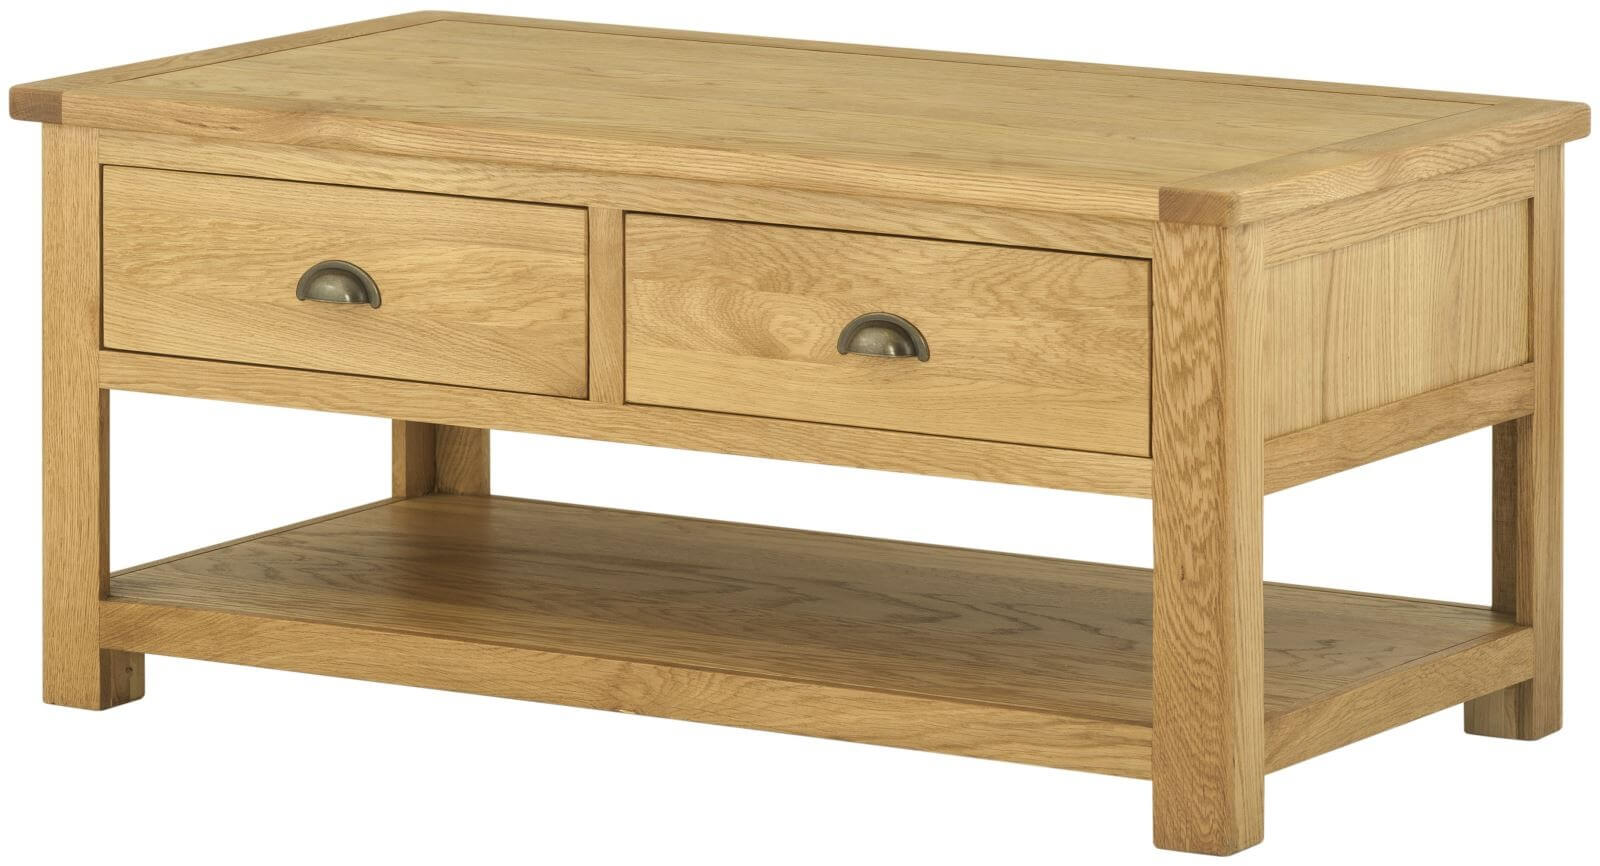 Showing image for Seattle coffee table with drawers - oak